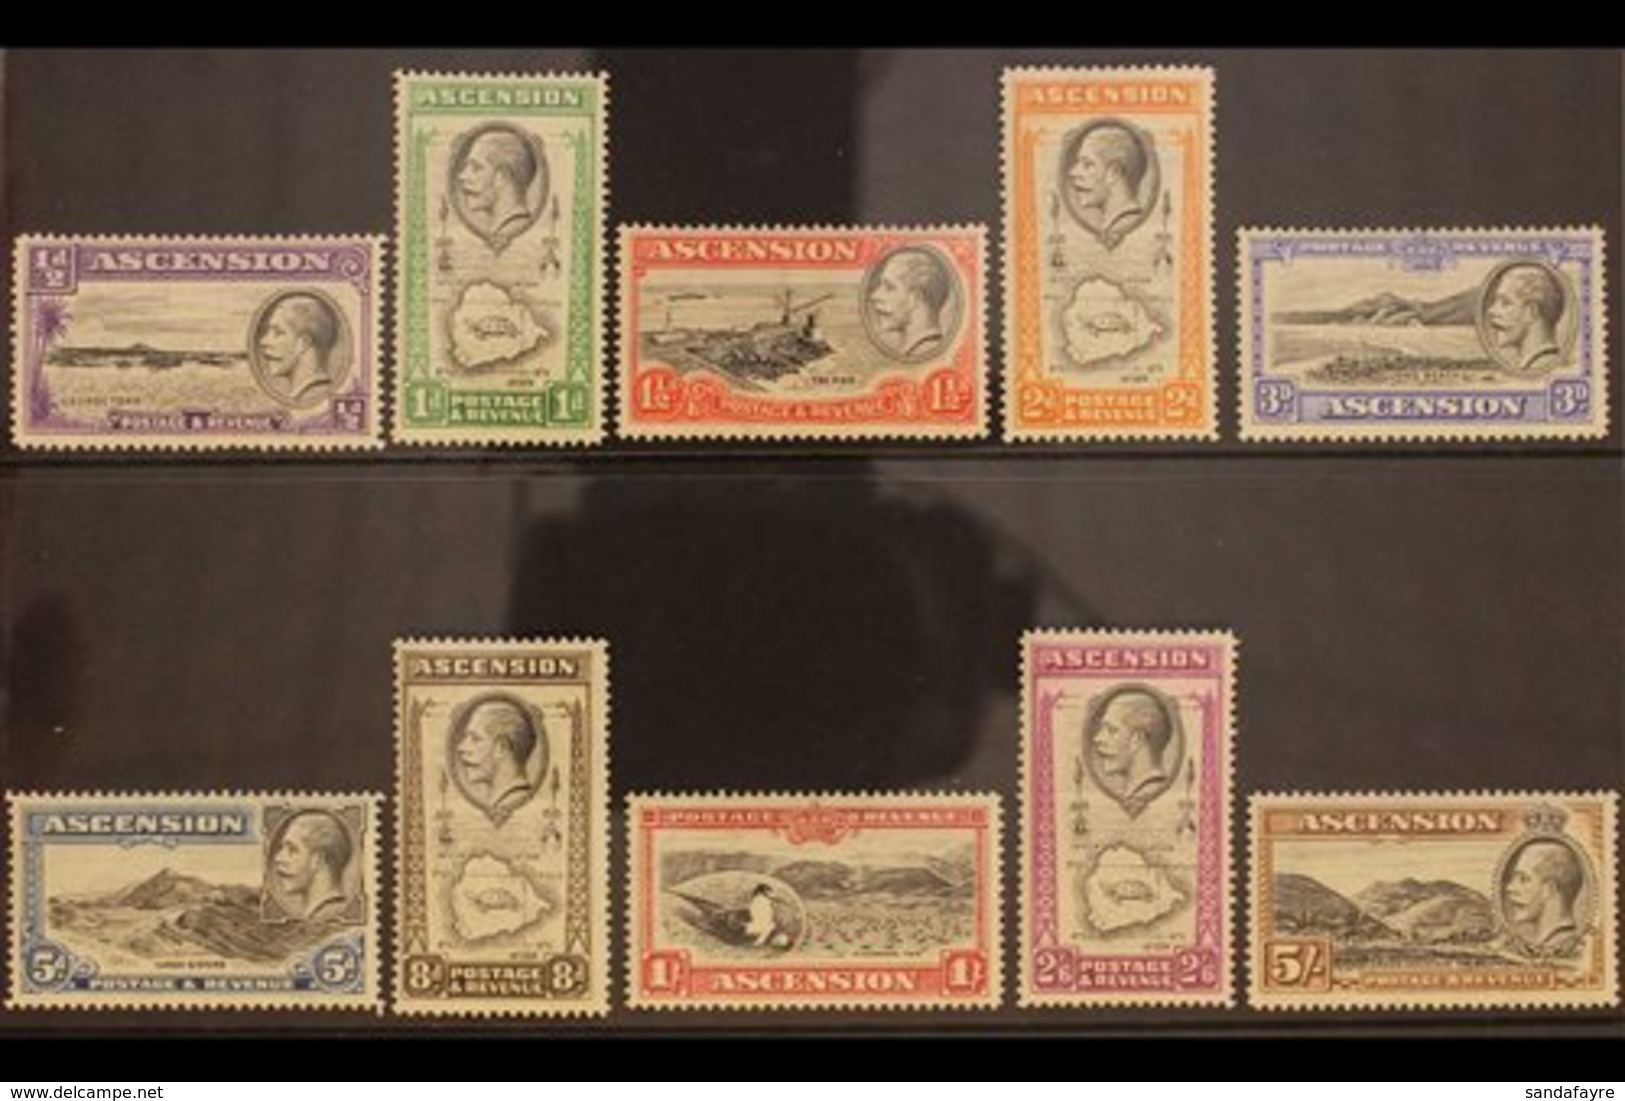 1934 Pictorial Definitives Complete Set, SG 21/30, Very Fine Mint, Extremely Lightly Hinged - Some Values Apparently Nev - Ascension